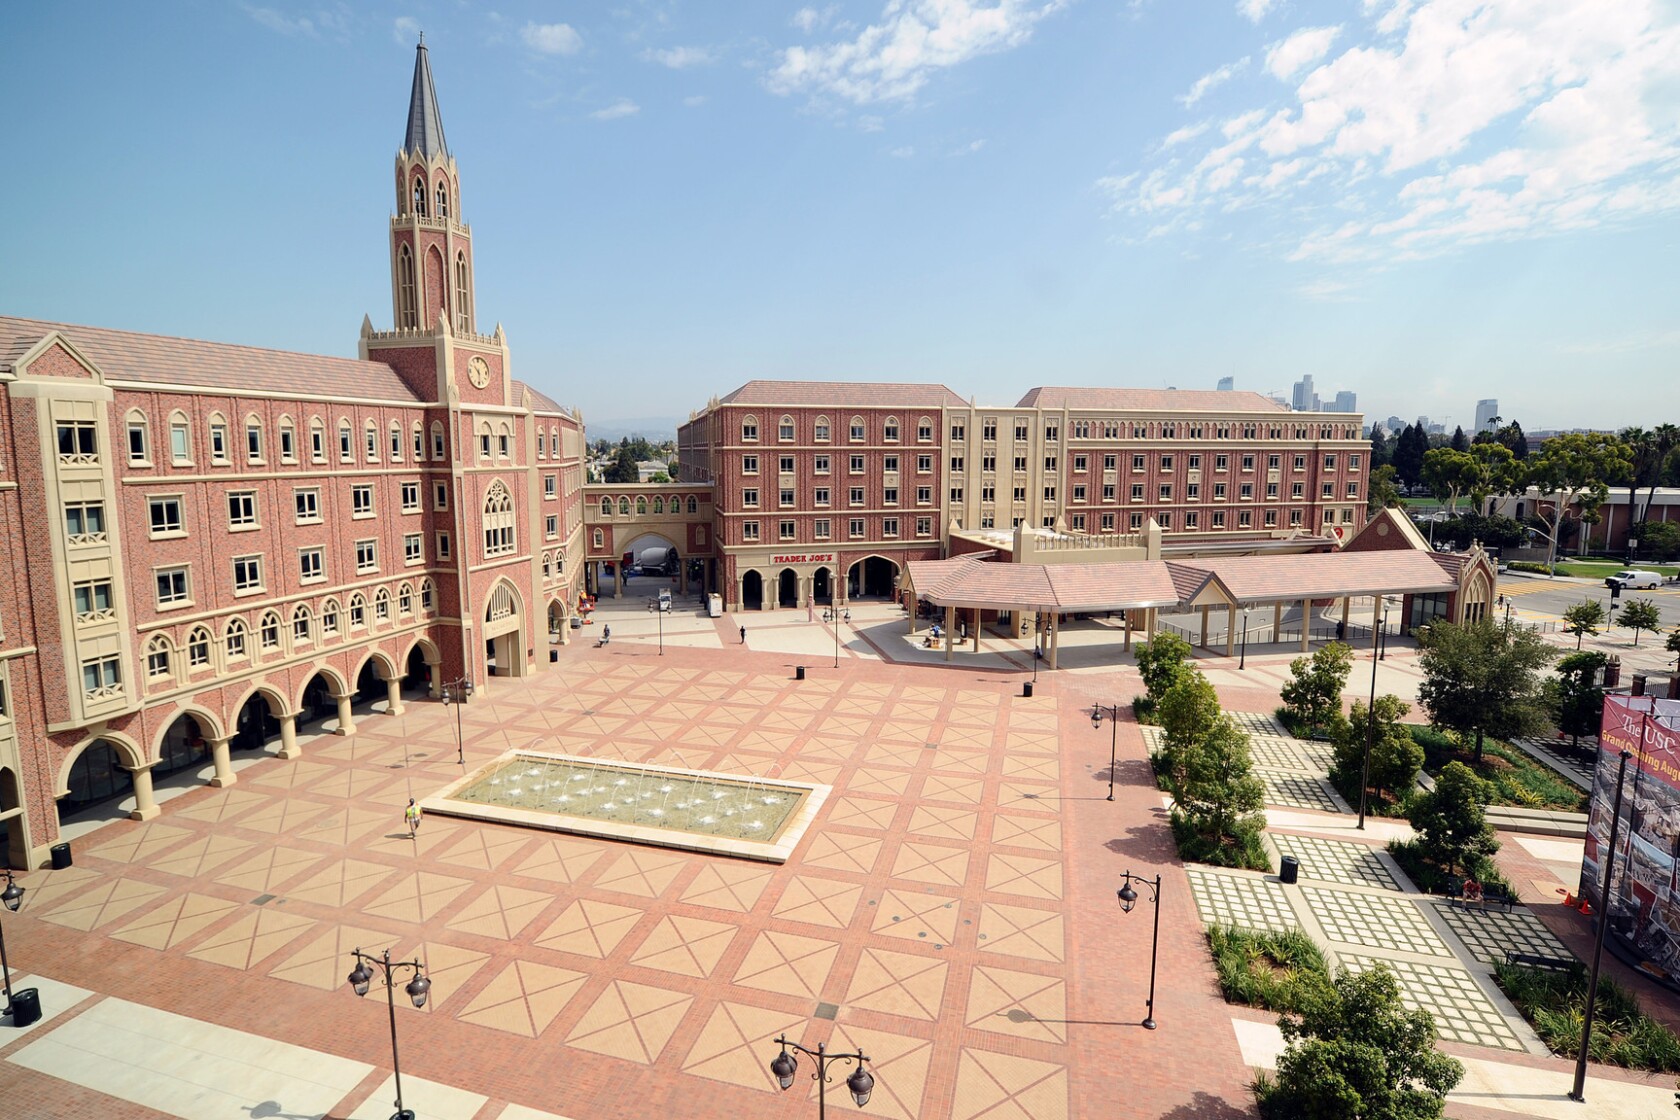 USC: A Comprehensive Overview of the University of Southern California